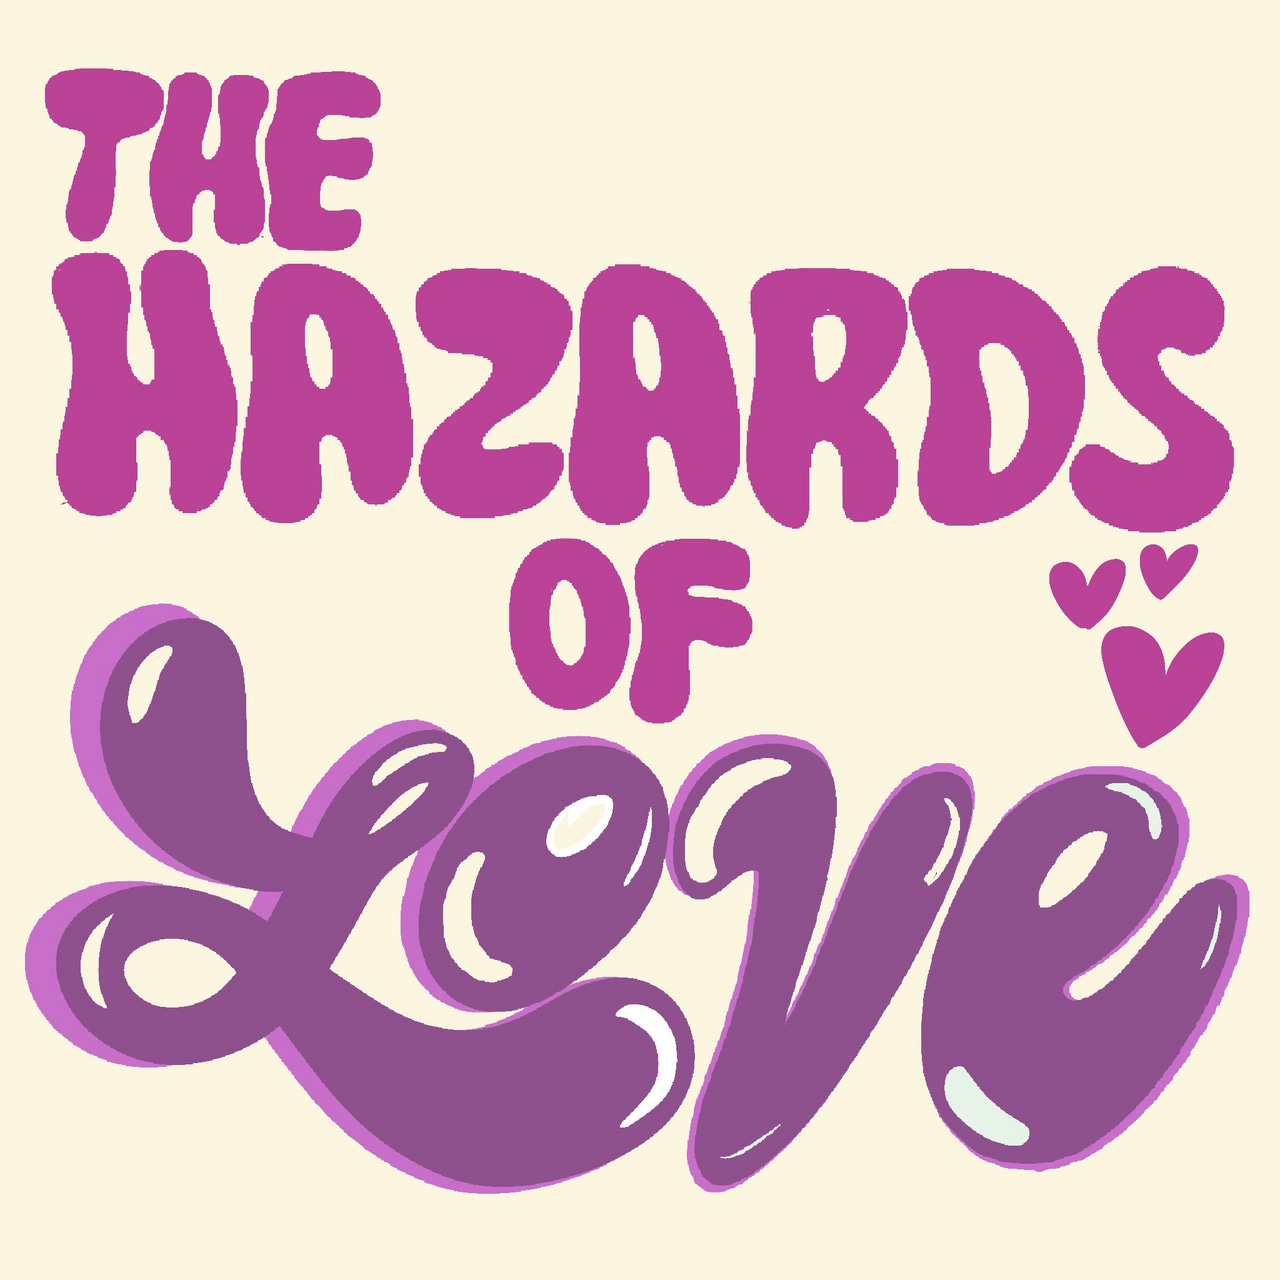 Artwork for The Hazards of Love